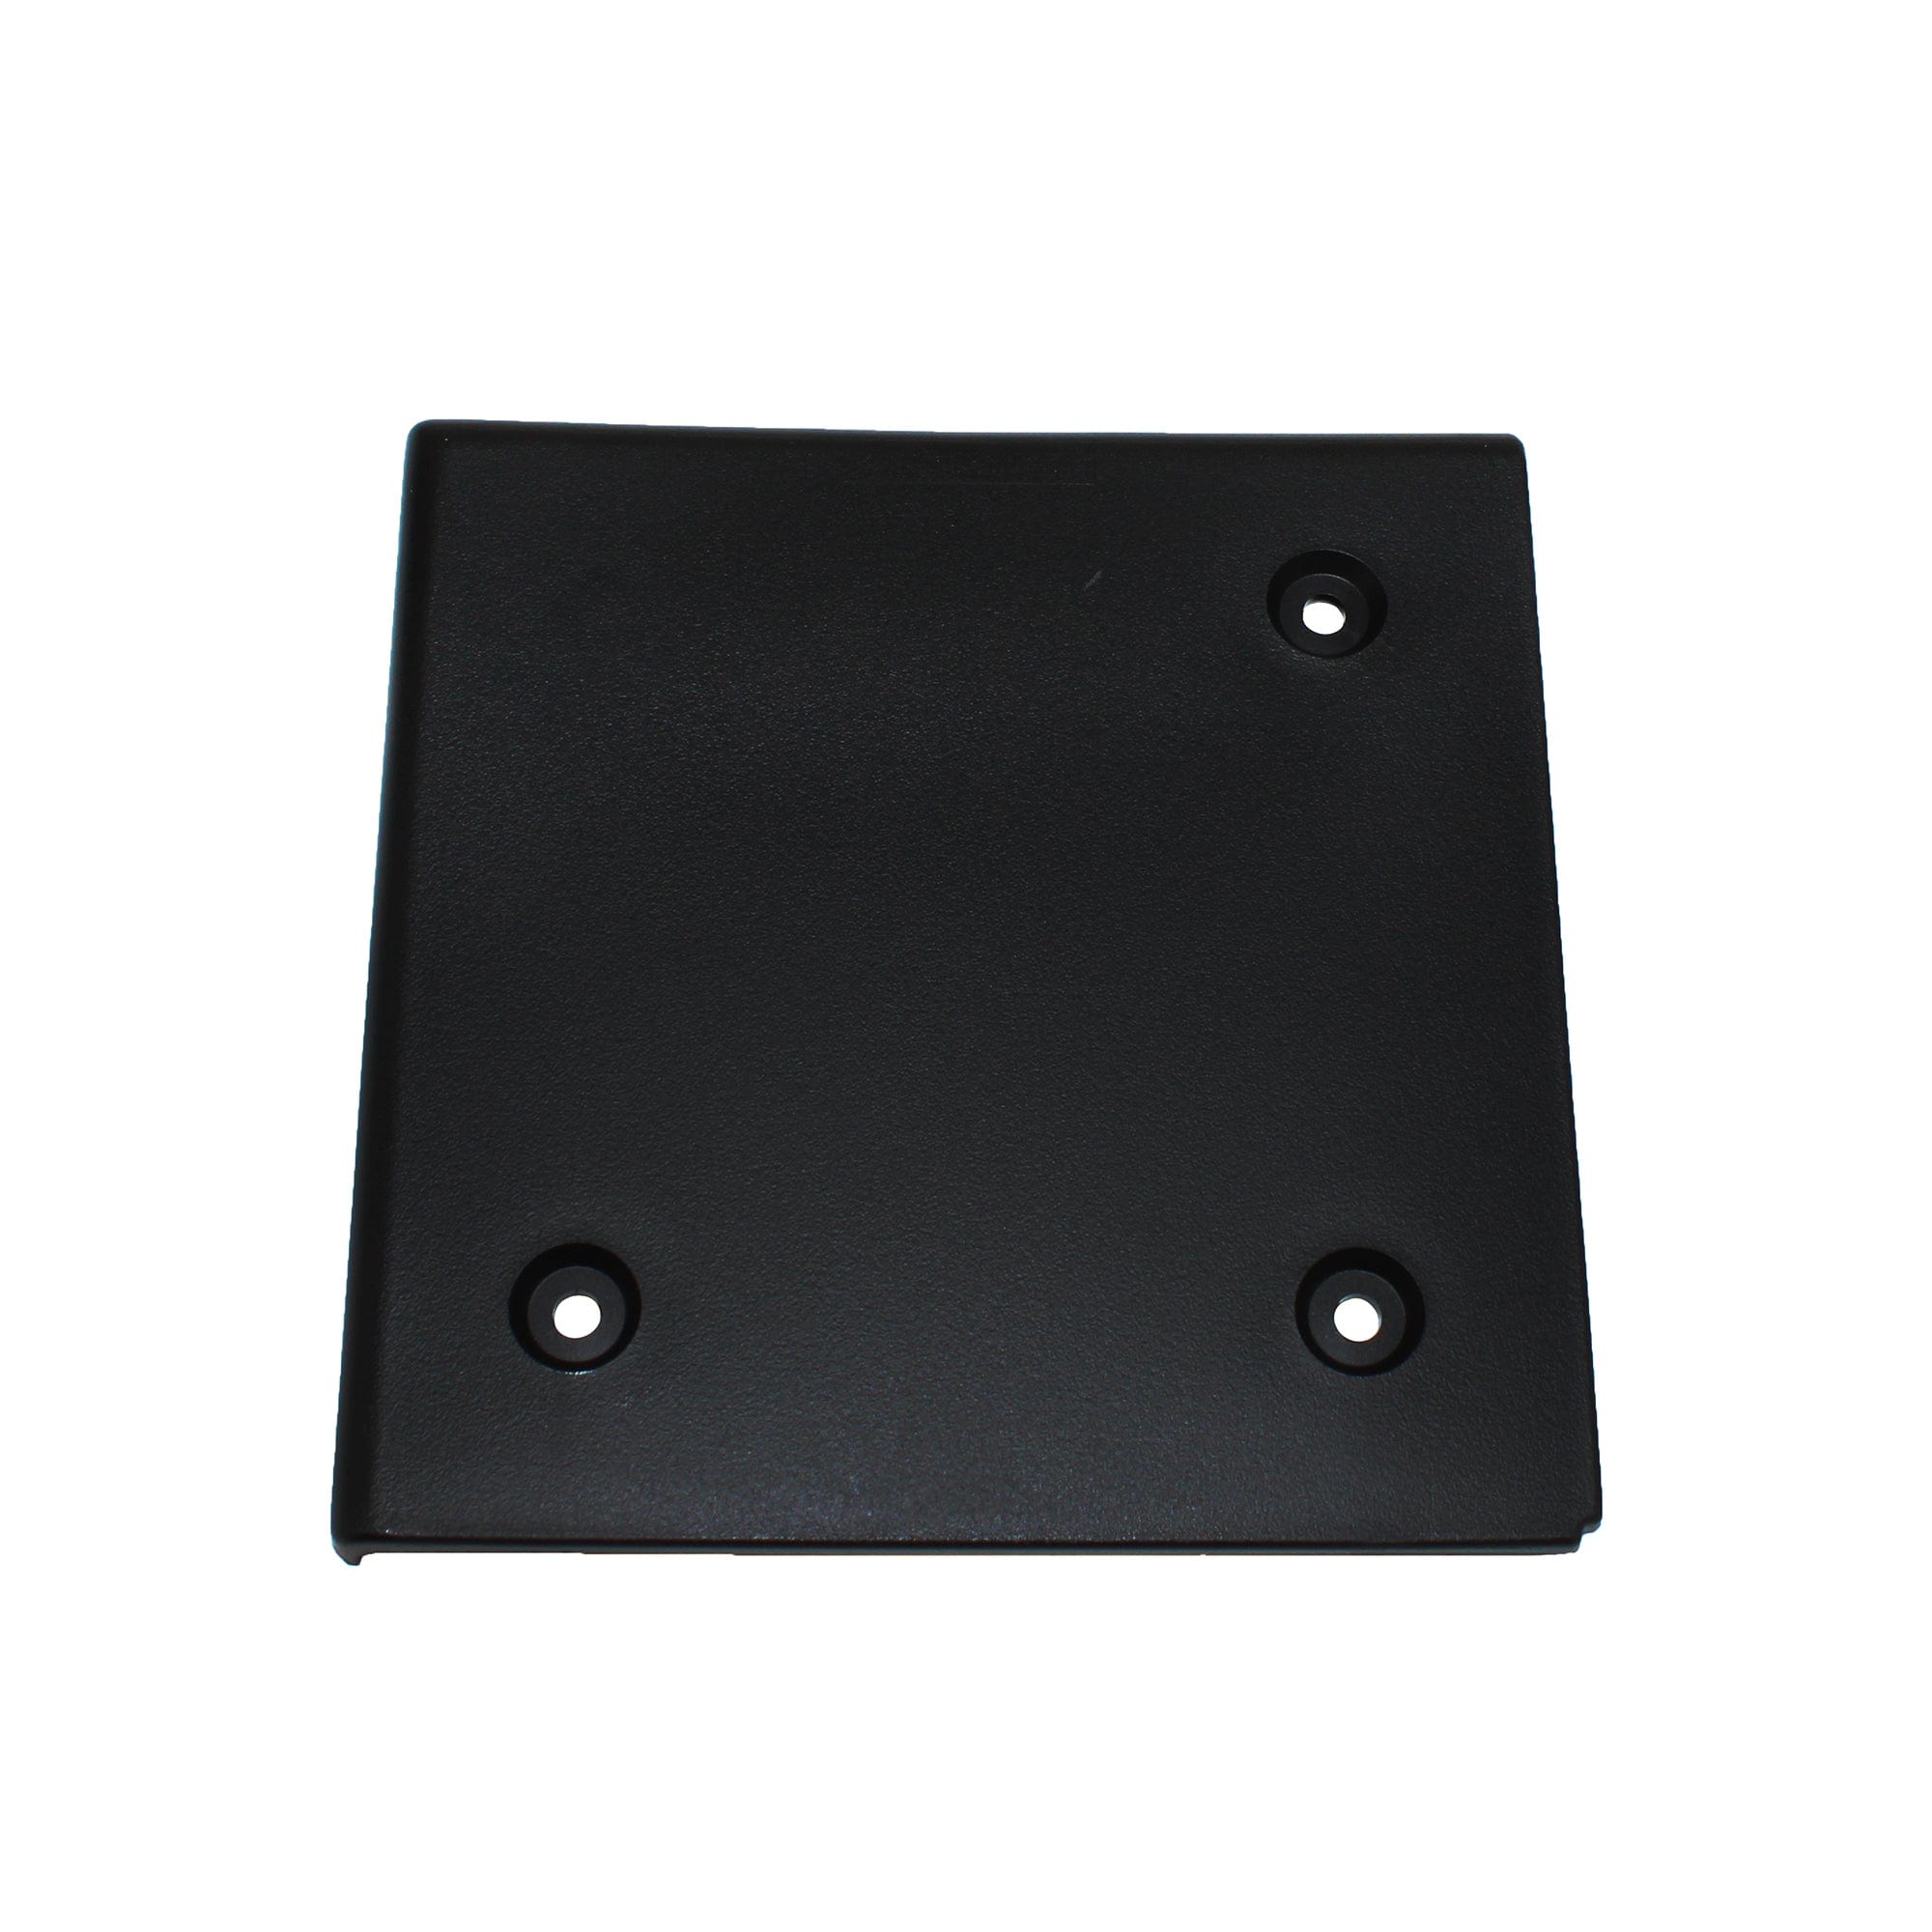 Thetford 94286 (601-022-94286) B&B Molders 4-1/2" Square Slide Out Extrusion Cover, Black